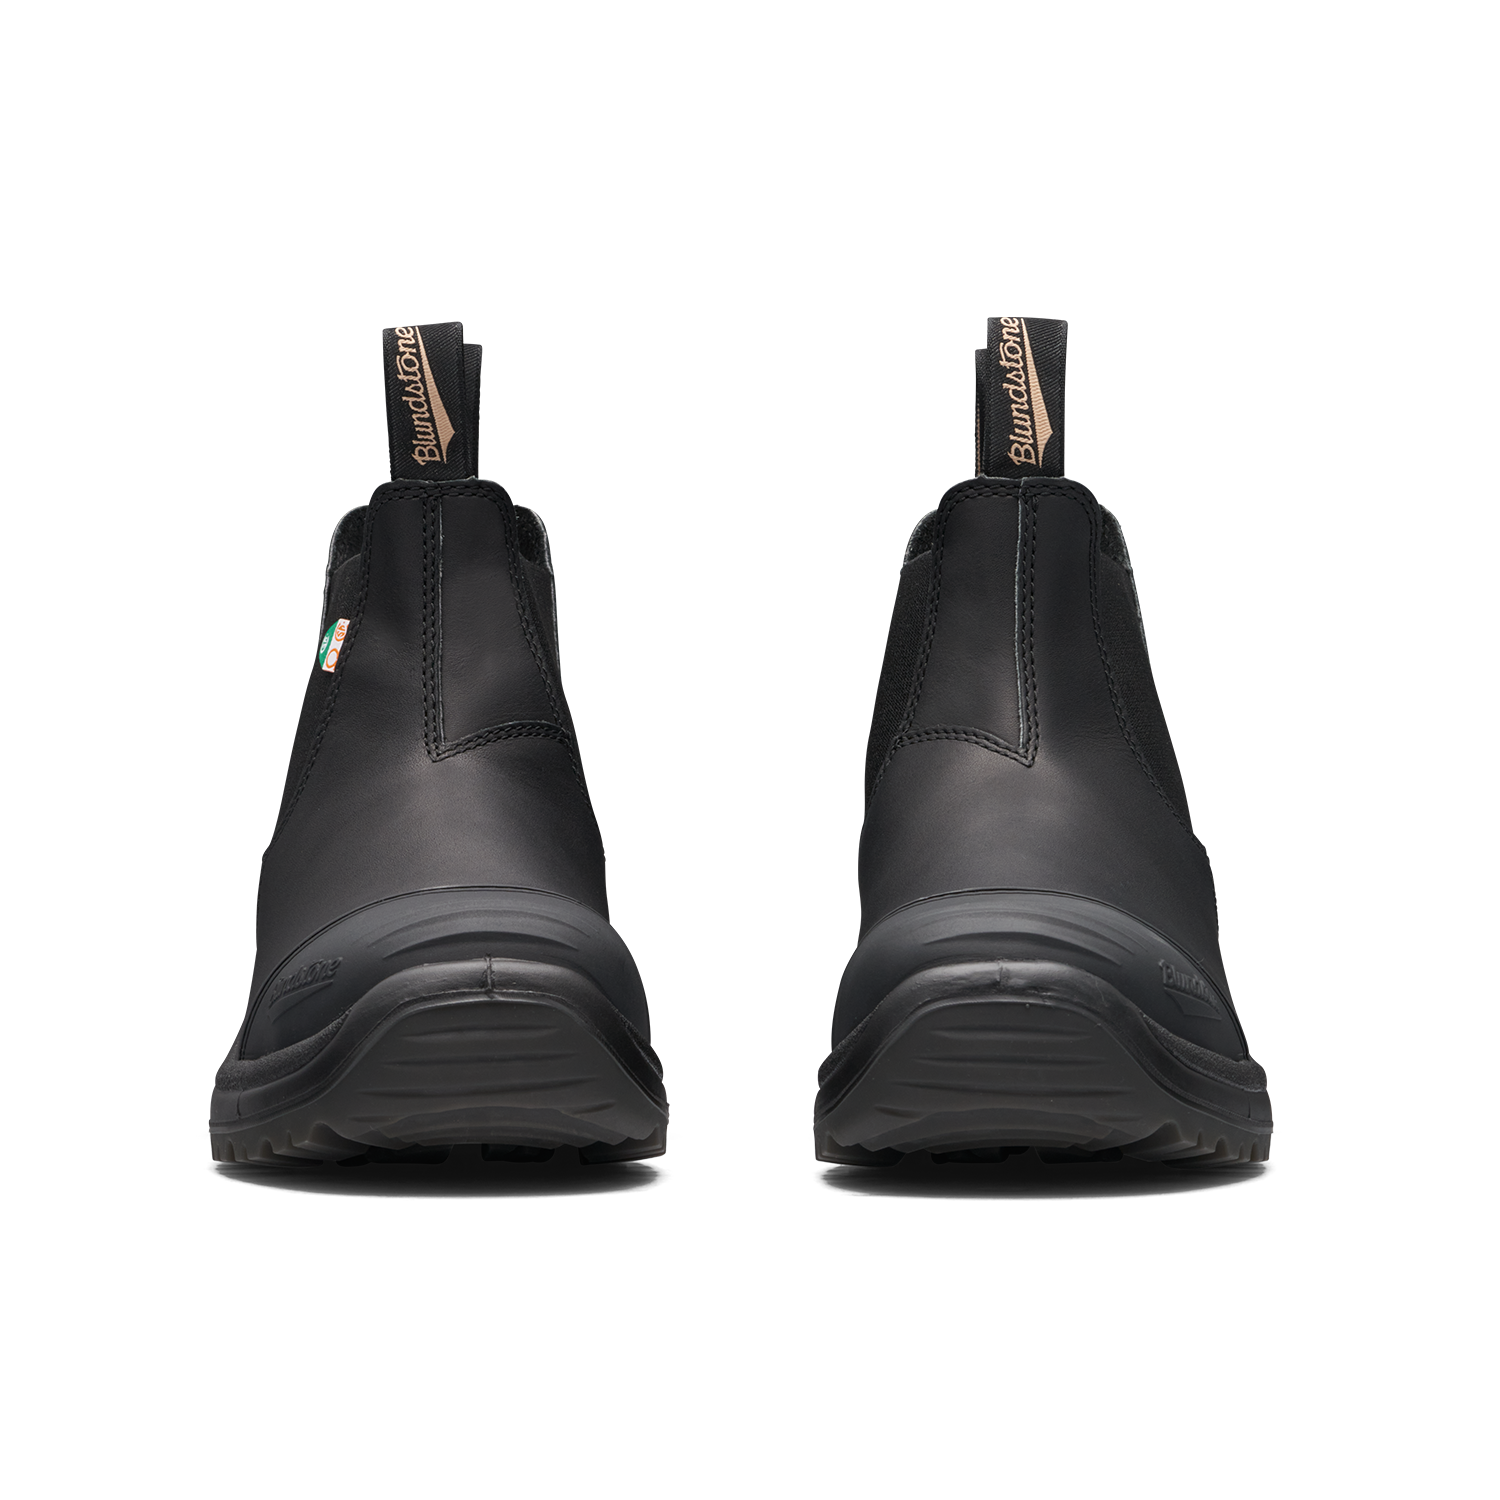 Blundstone 168 Work & Safety Boot Rubber Toe Cap Black